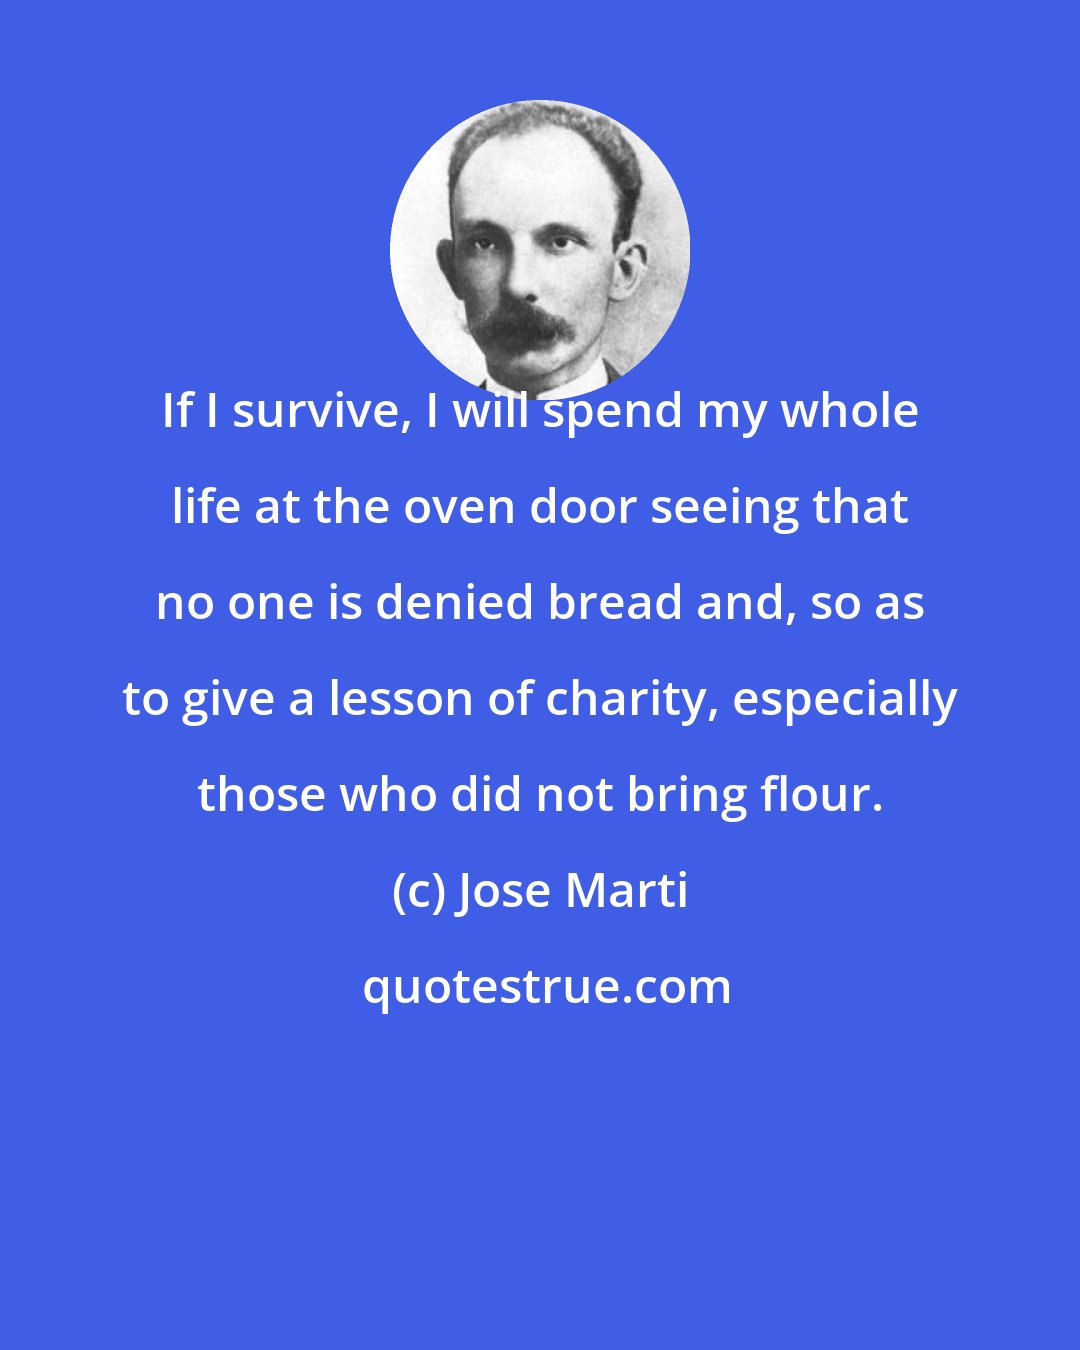 Jose Marti: If I survive, I will spend my whole life at the oven door seeing that no one is denied bread and, so as to give a lesson of charity, especially those who did not bring flour.